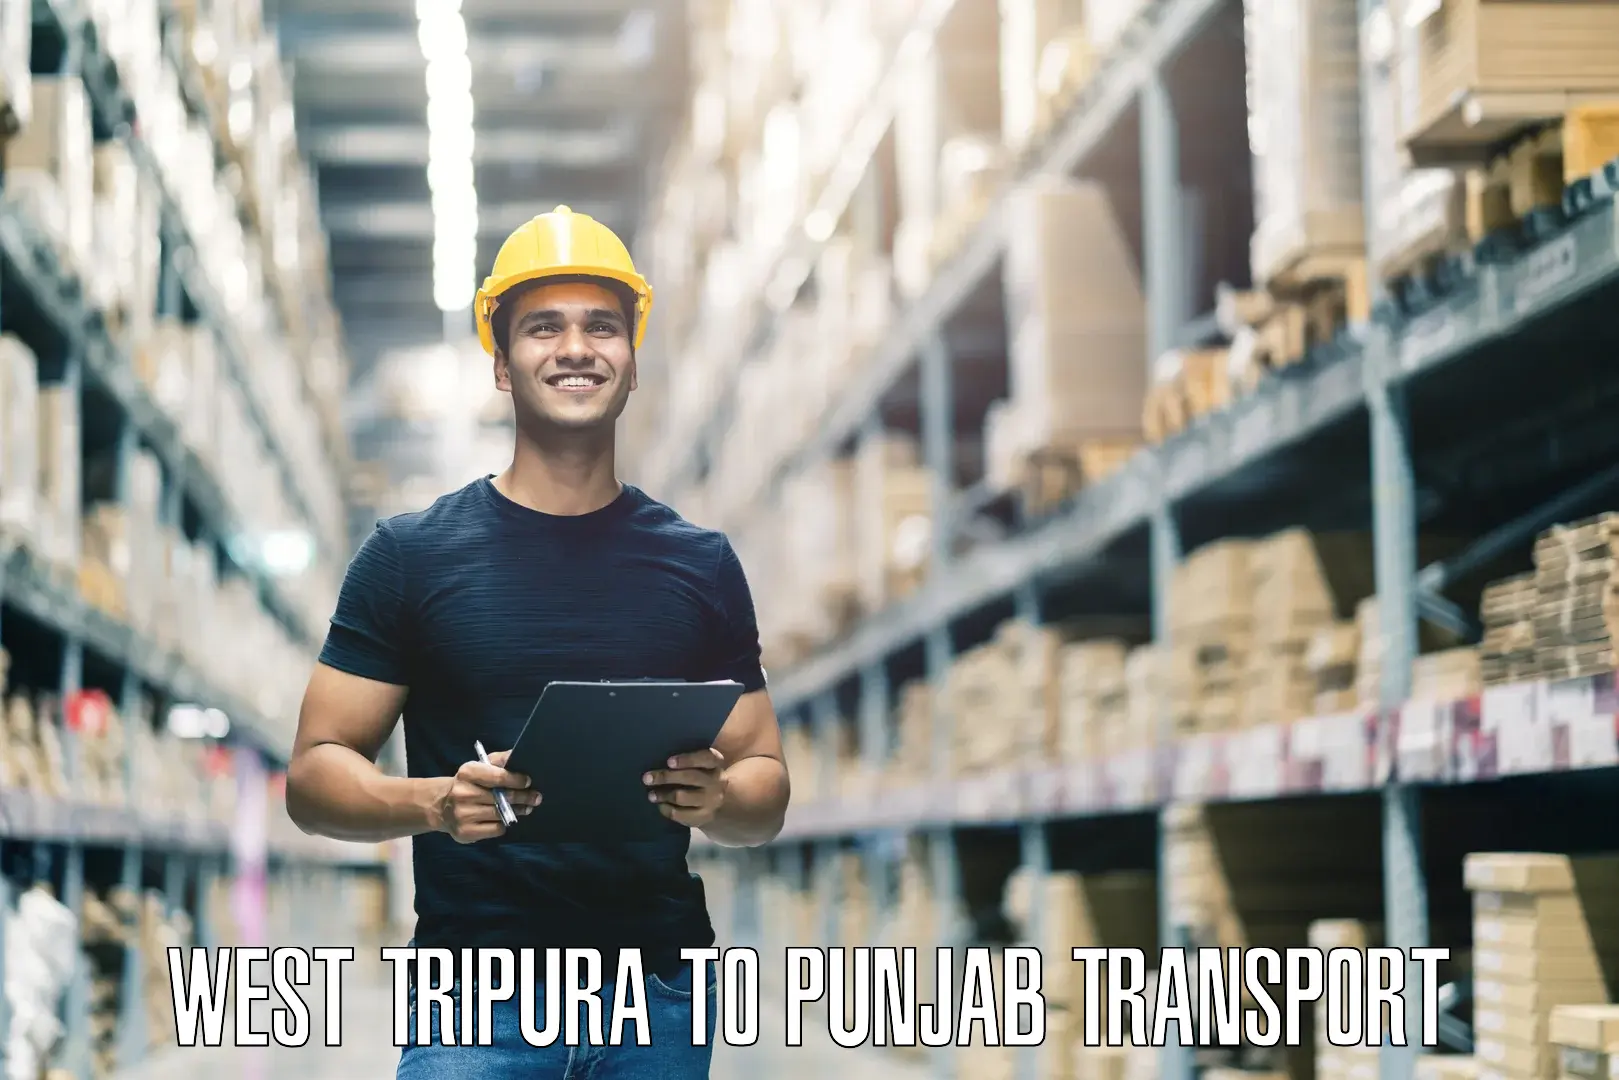 Road transport online services in West Tripura to Begowal